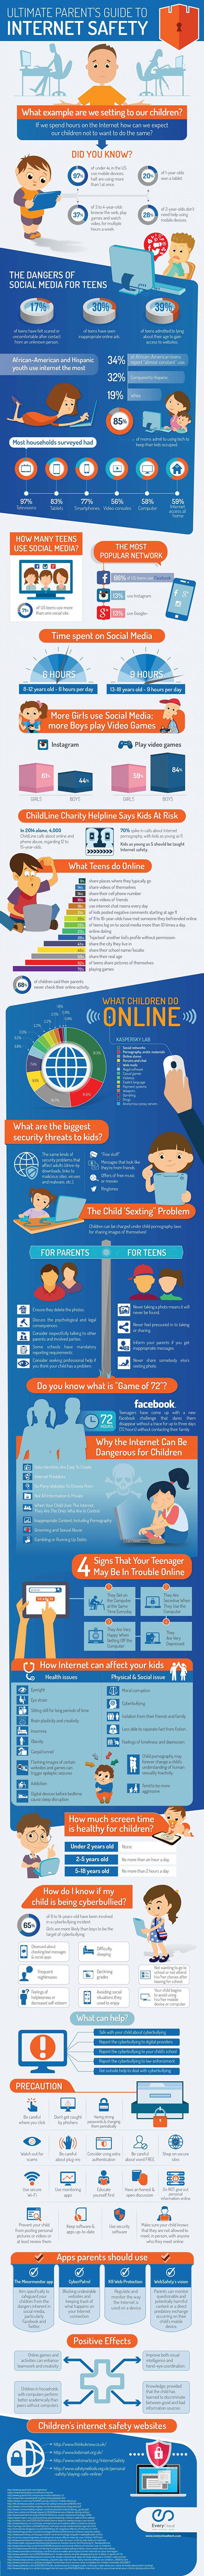 The Ultimate Guide To Kid Internet Safety